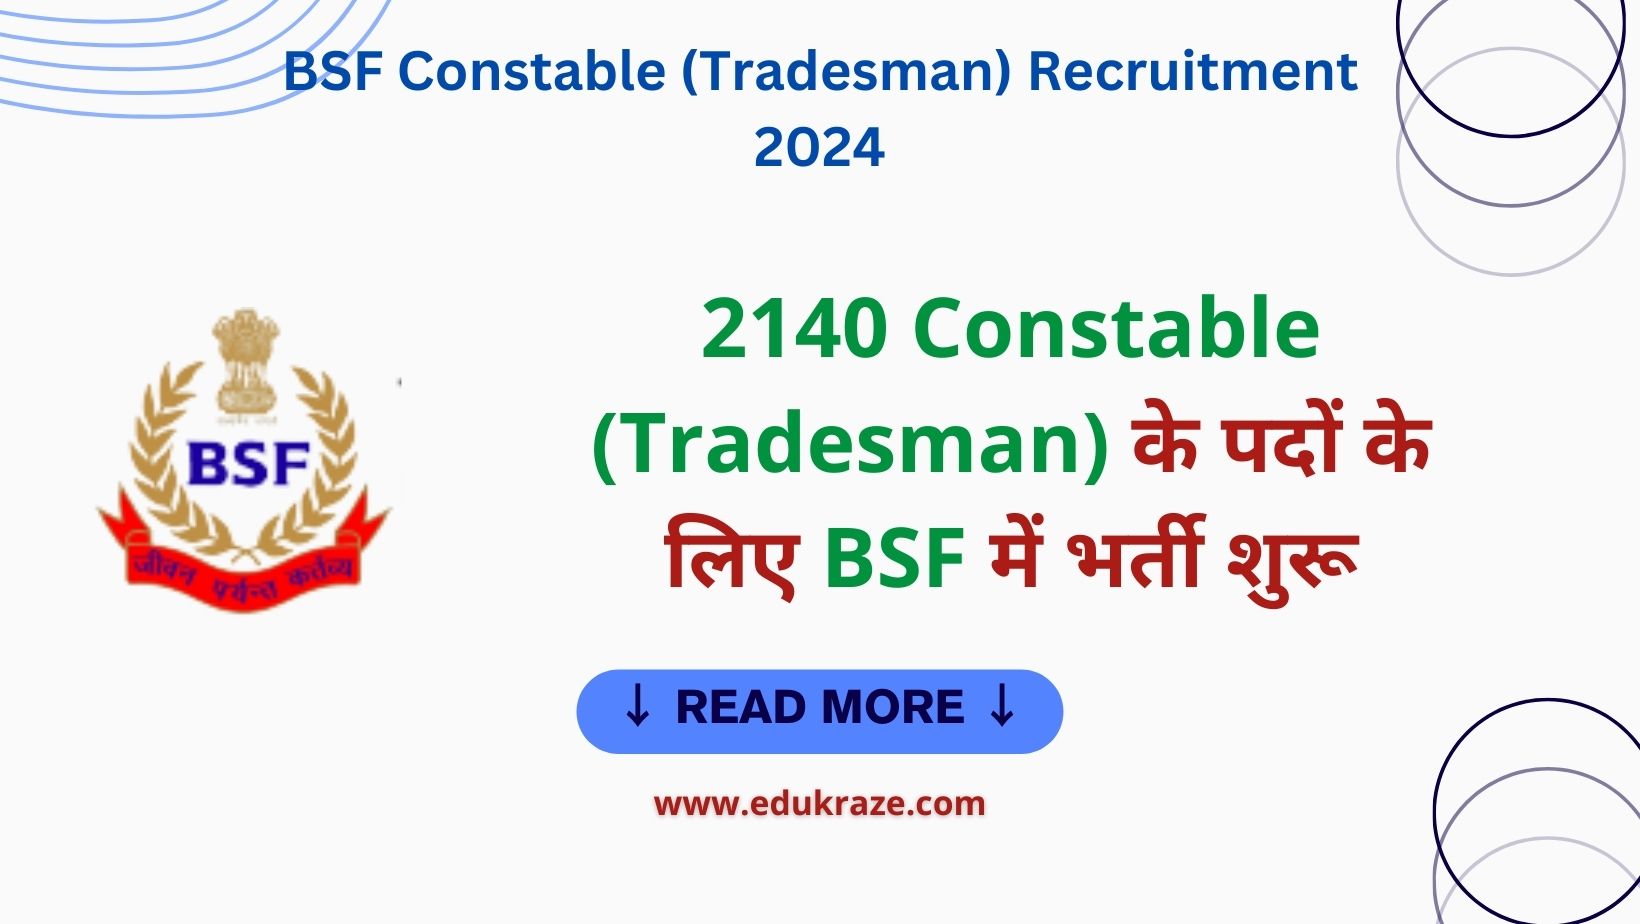 Constable (Tradesman) vacancies Out at BSF Apply Online for 2140 Posts